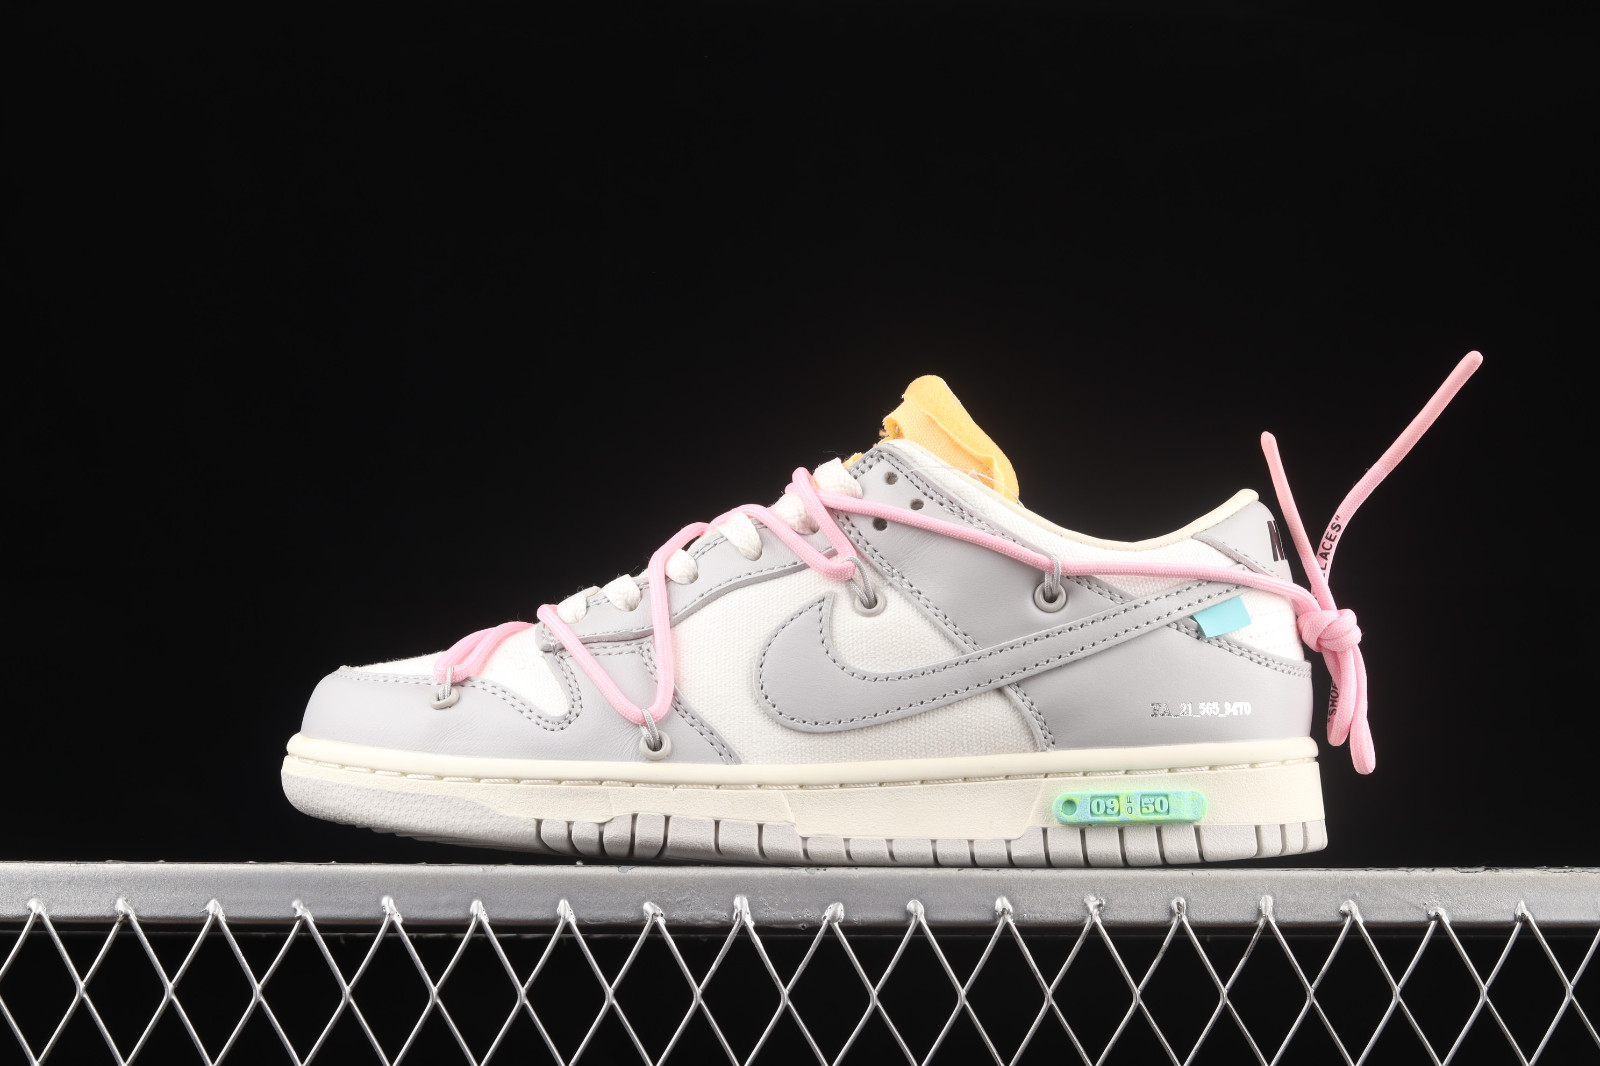 Off-White x Nike SB Dunk Low Lot 9 of 50 Sail Neutral Grey Pink 